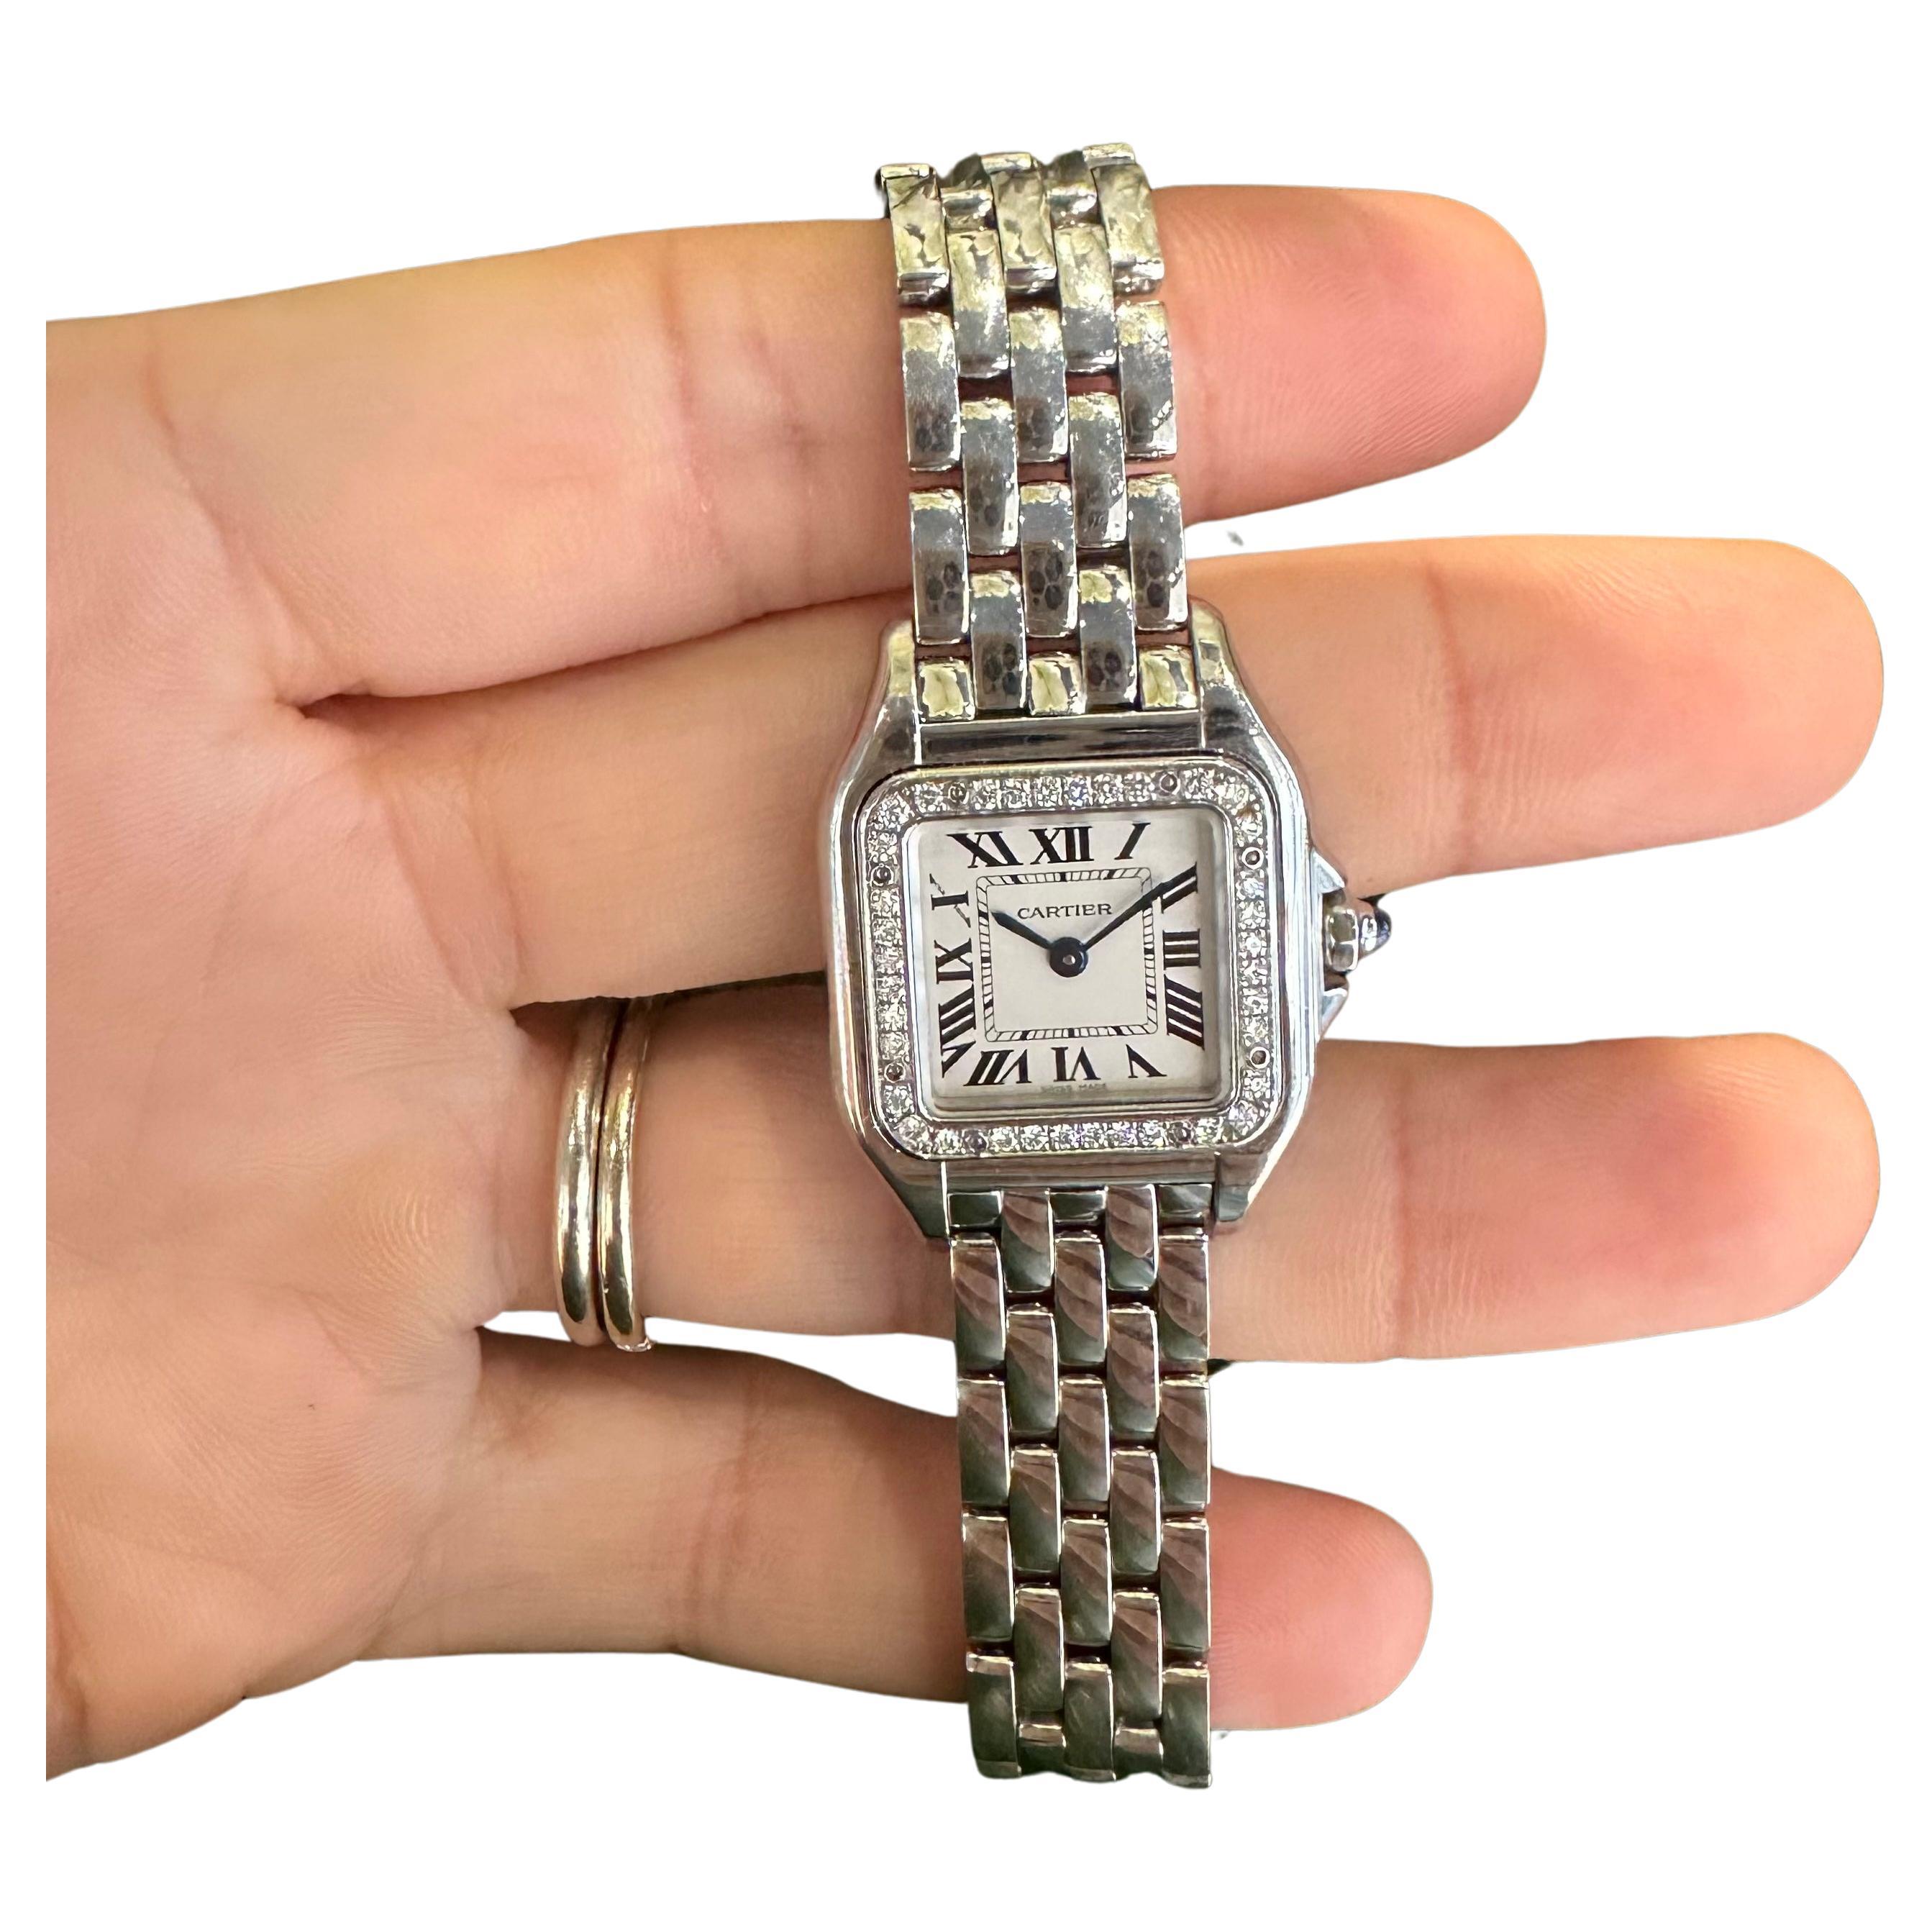 Brand: Cartier

Model: Panthere Small Model

Movement: Quartz

Stone: Round Brilliant Cut Diamonds

Case Size: 23mm x 30mm 

Material: Stainless Steel ​

Bezel: Diamond 

Crown: Synthetic Blue Spinel

Dial:  Silver 

Includes: 24 Month Brilliance